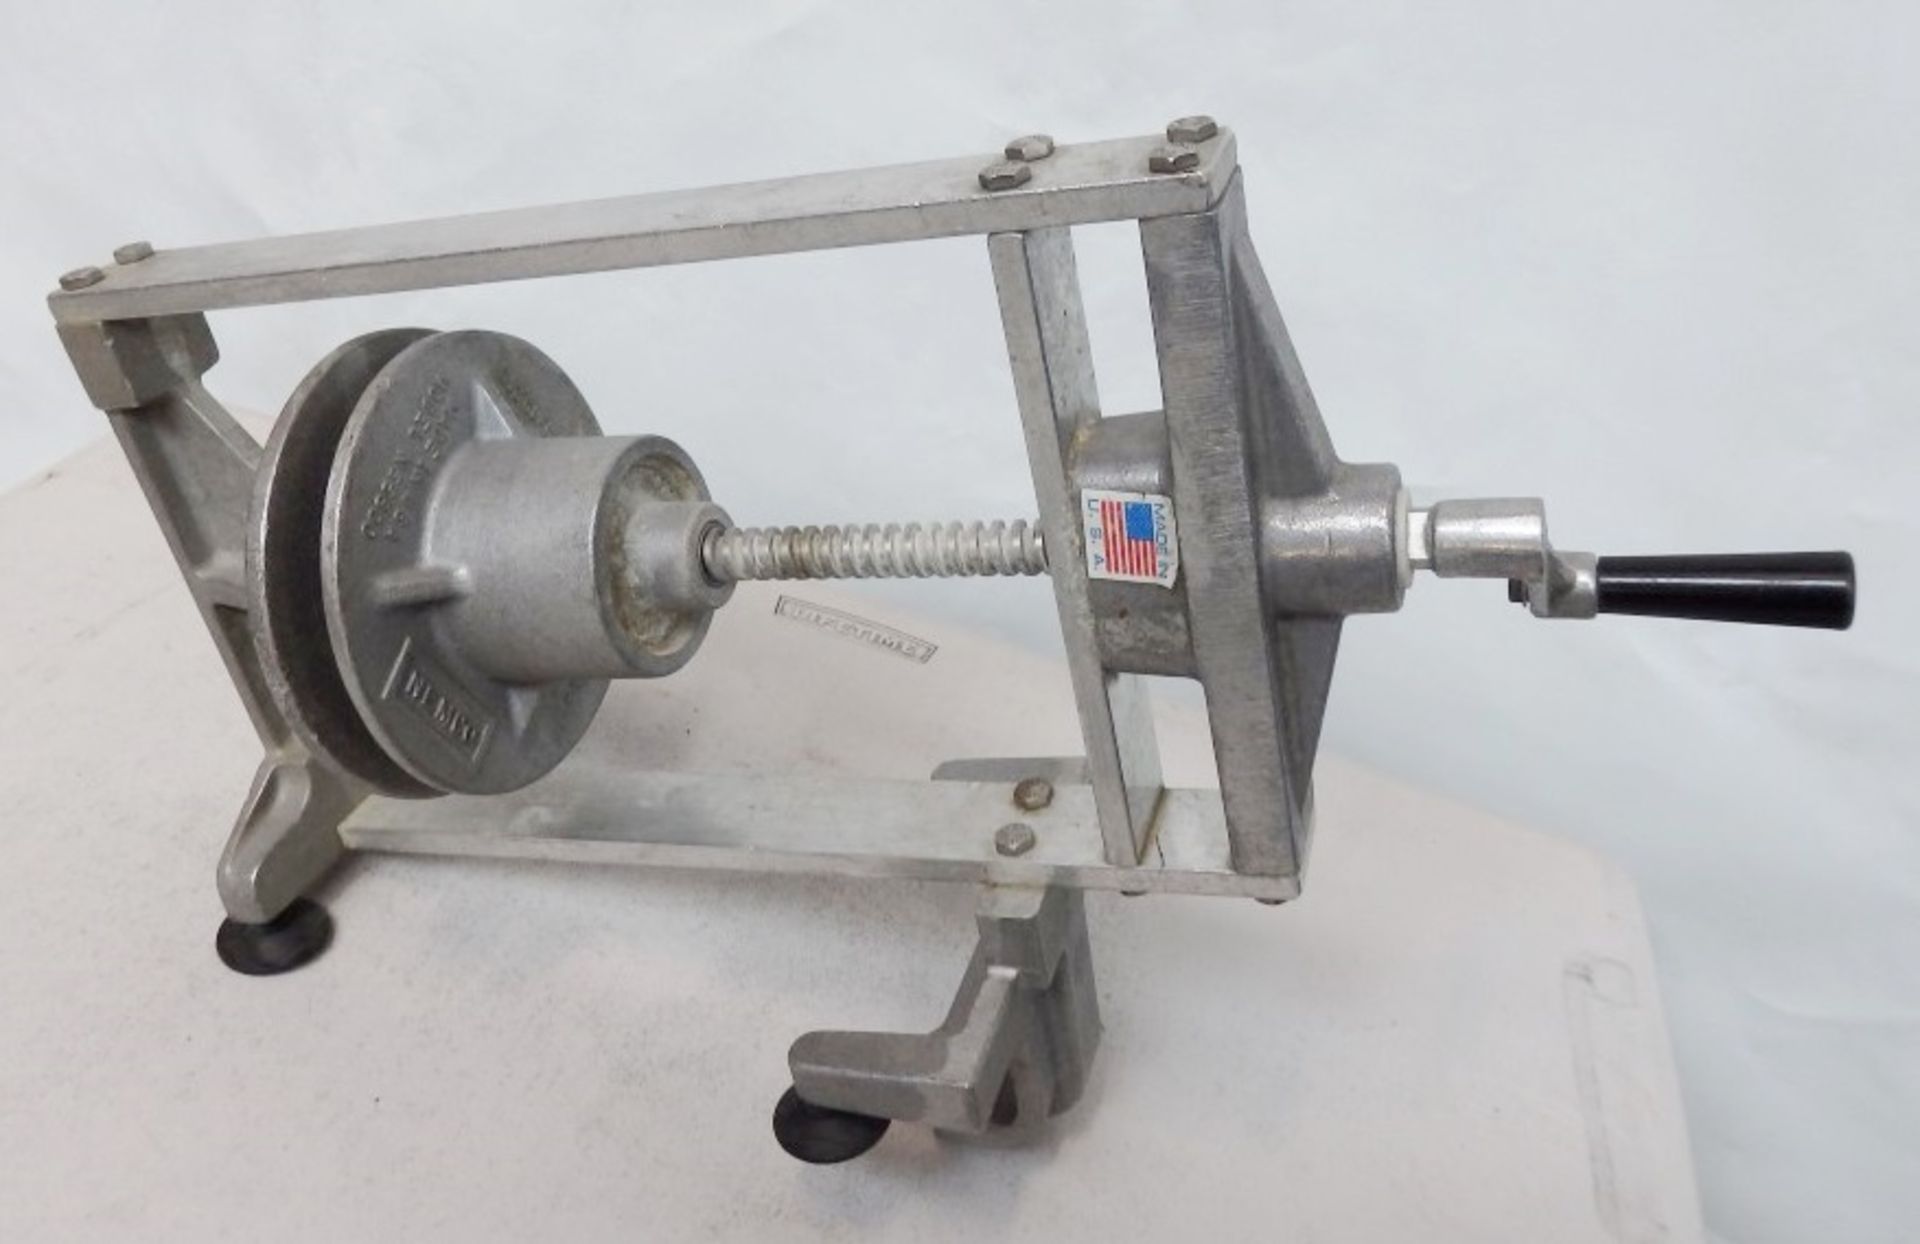 1 x Nemco N55800 Easy Tuna Press for Food Preparation - Recently Removed from a Professional